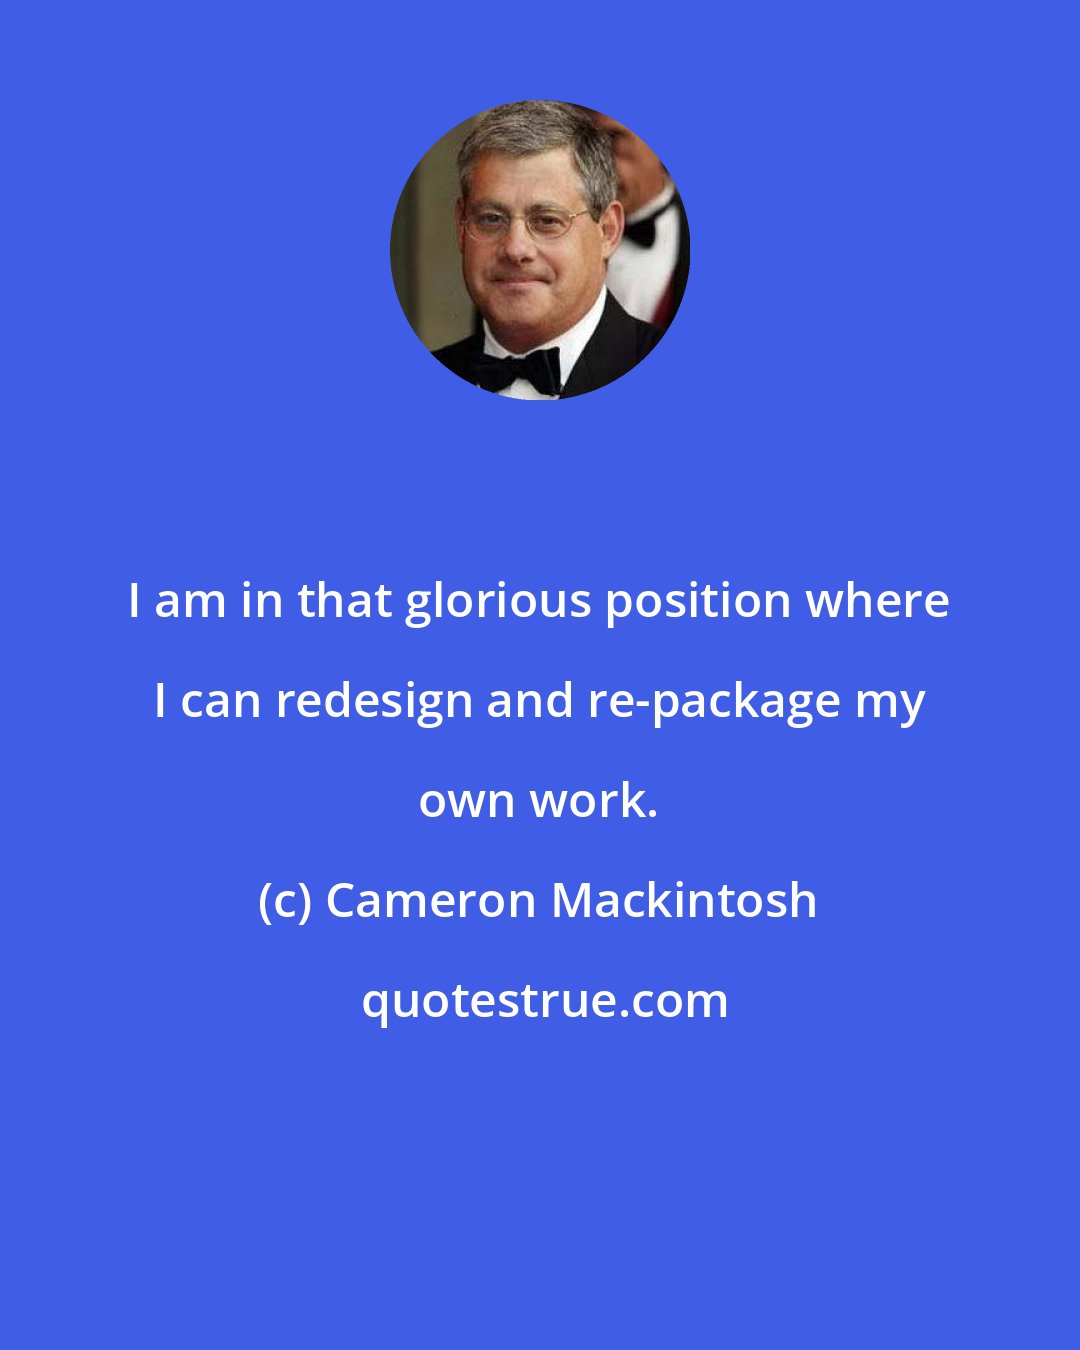 Cameron Mackintosh: I am in that glorious position where I can redesign and re-package my own work.